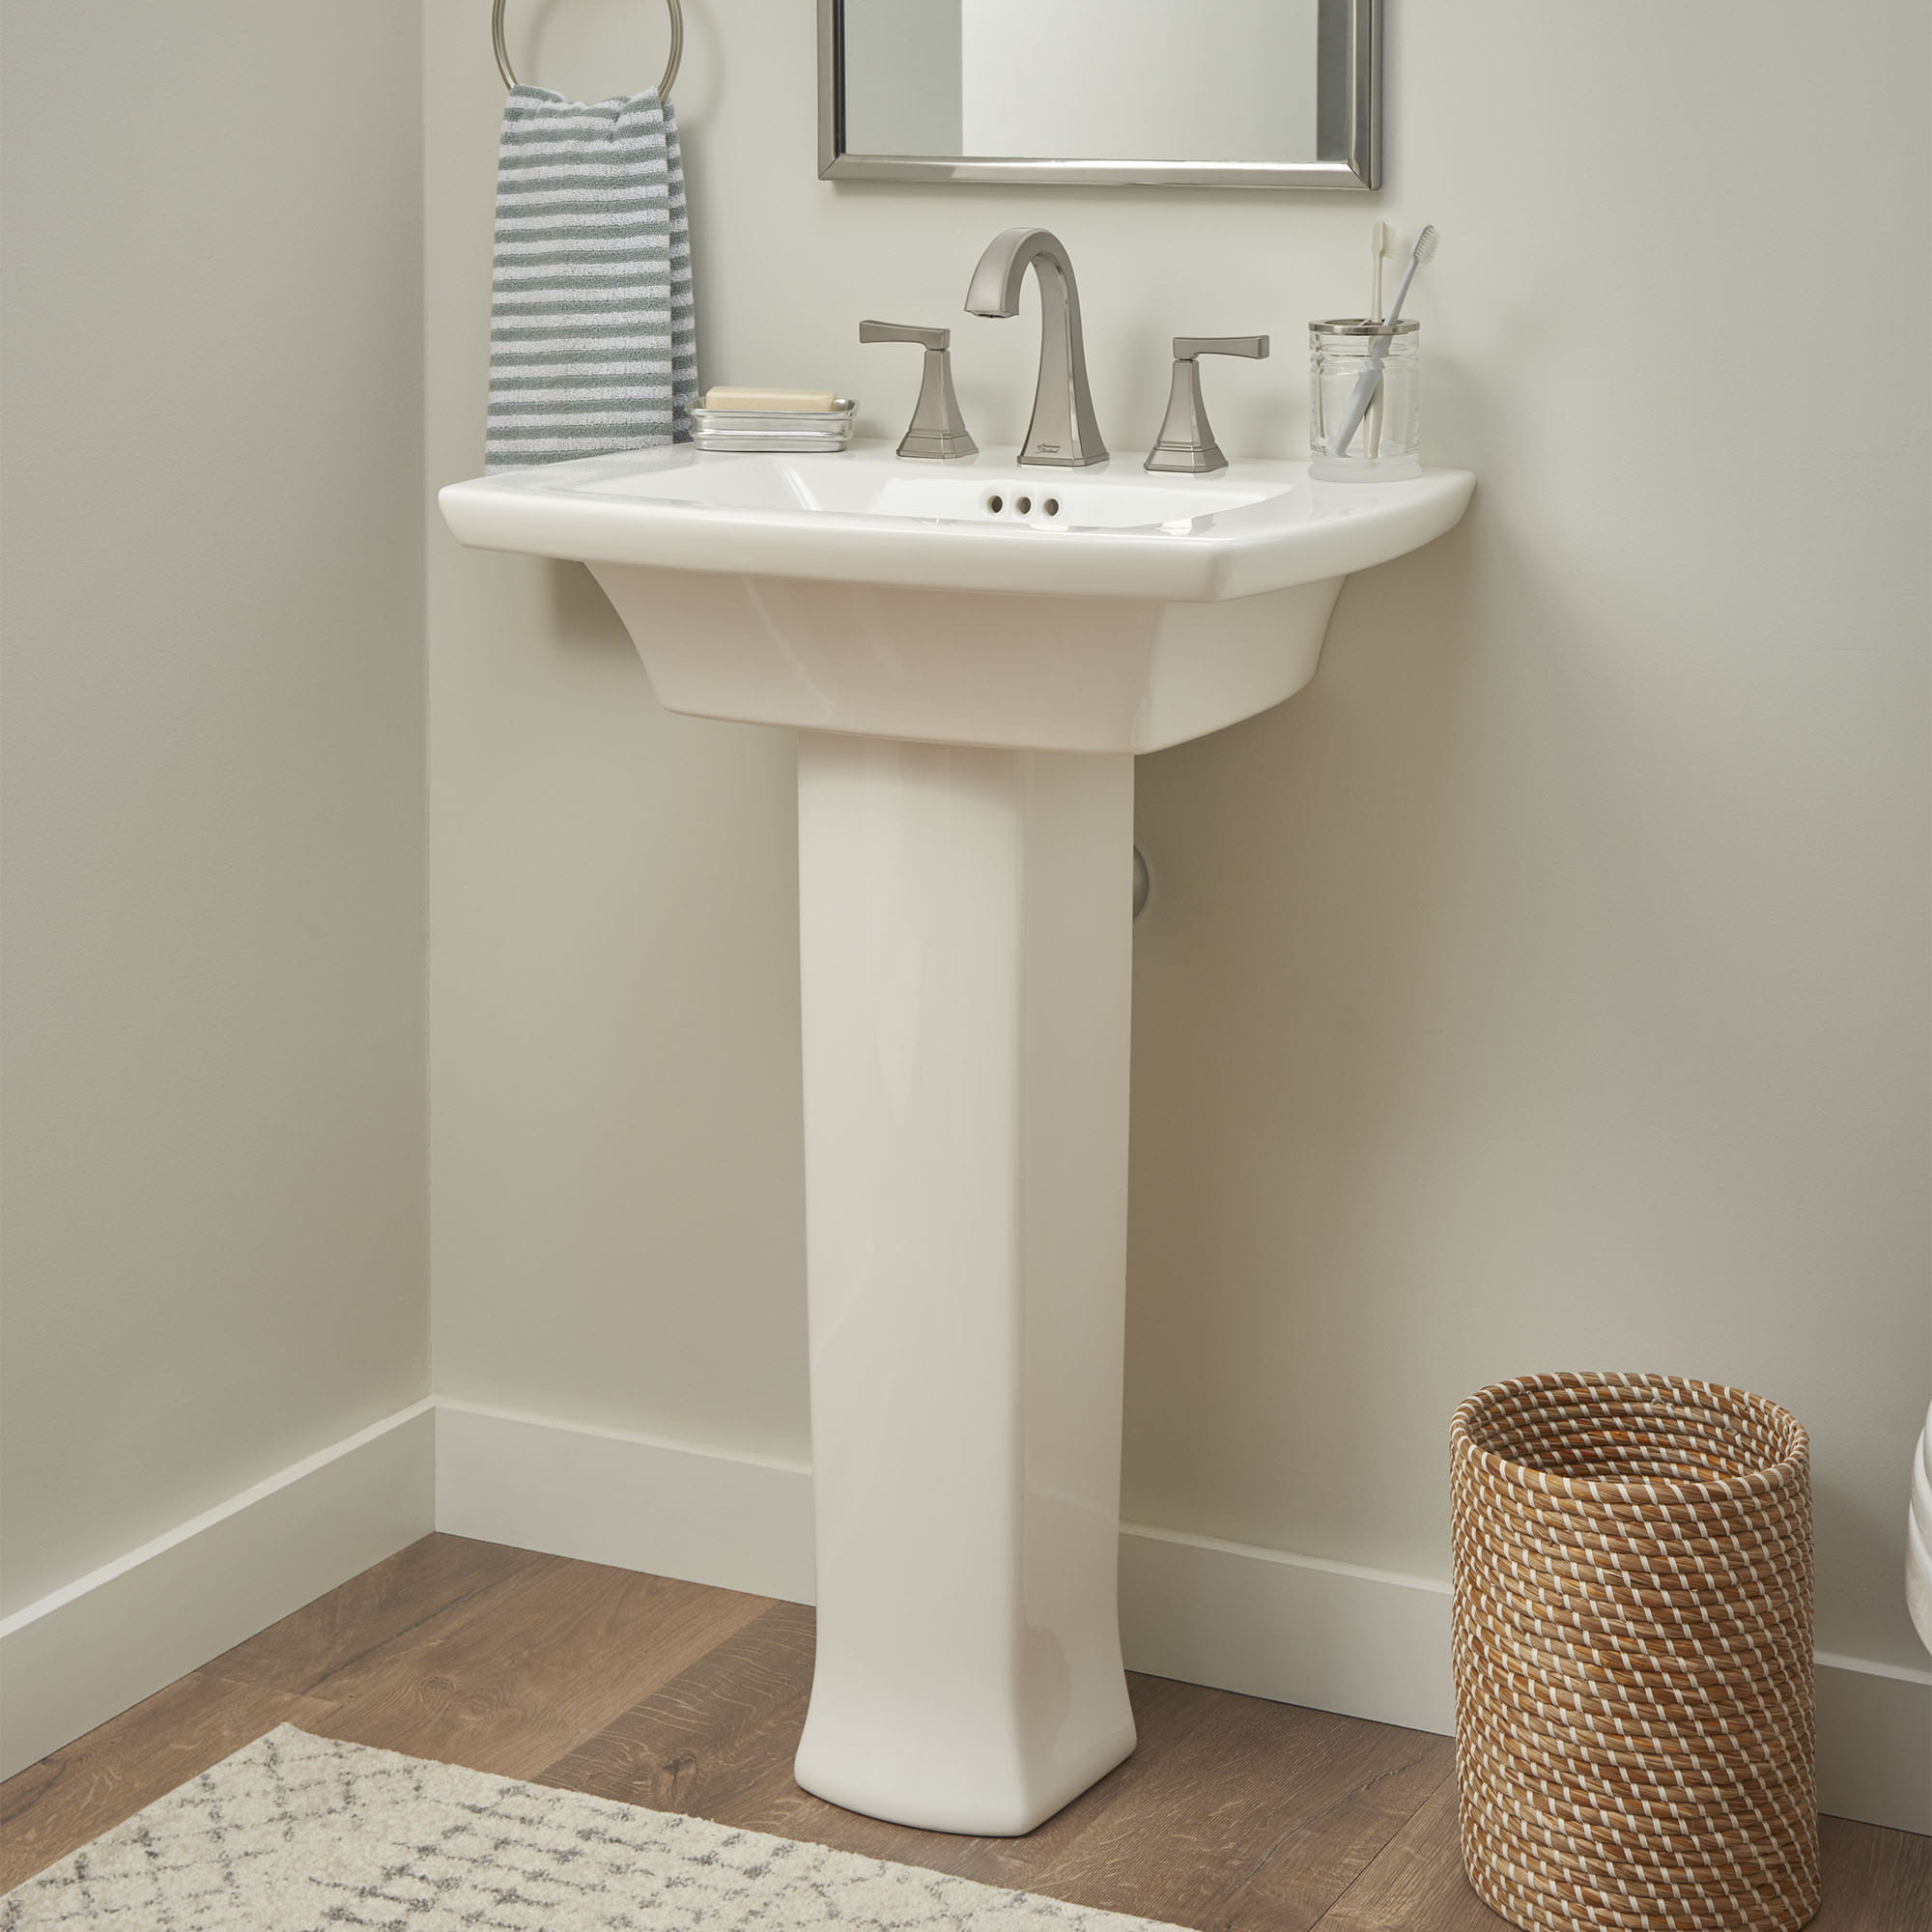 Edgemere 8 Inch Widespread Pedestal Sink Top and Leg Combination WHITE